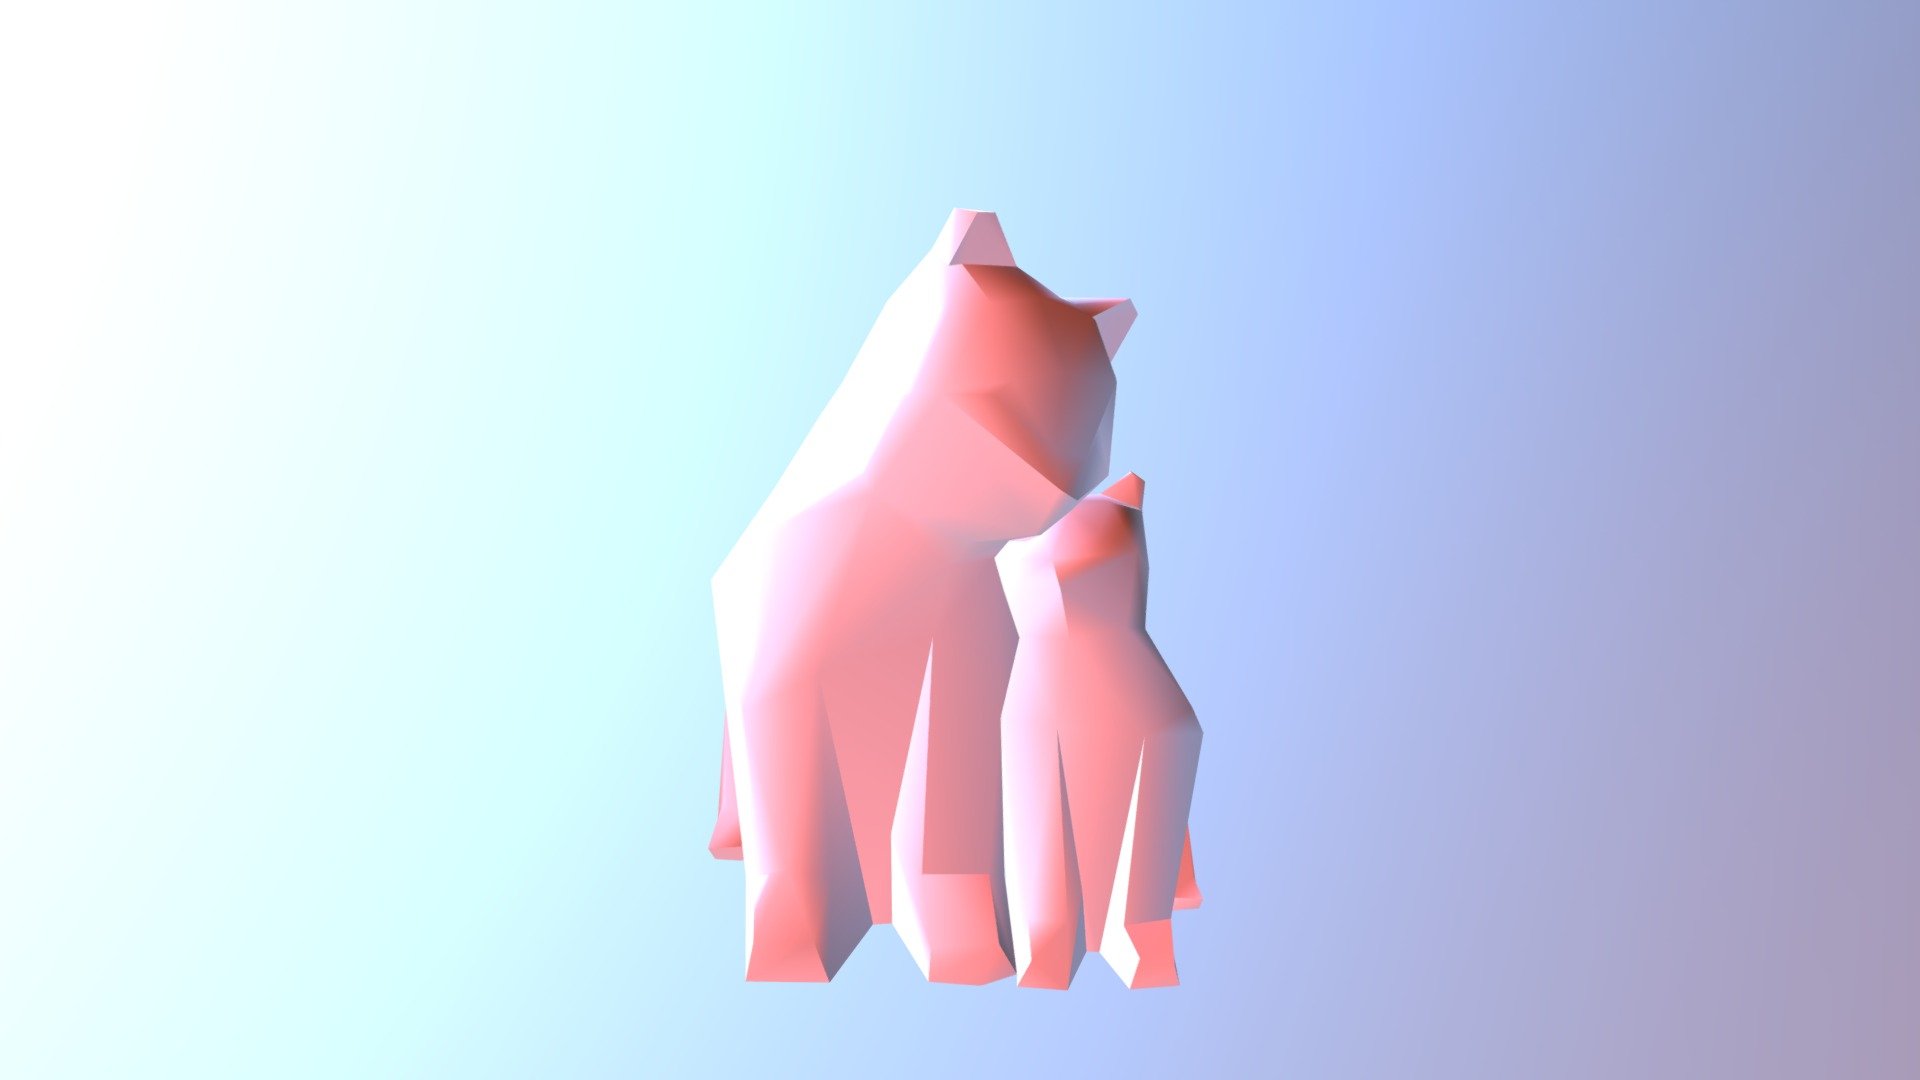 Low Poly Cuddling Cats (1)